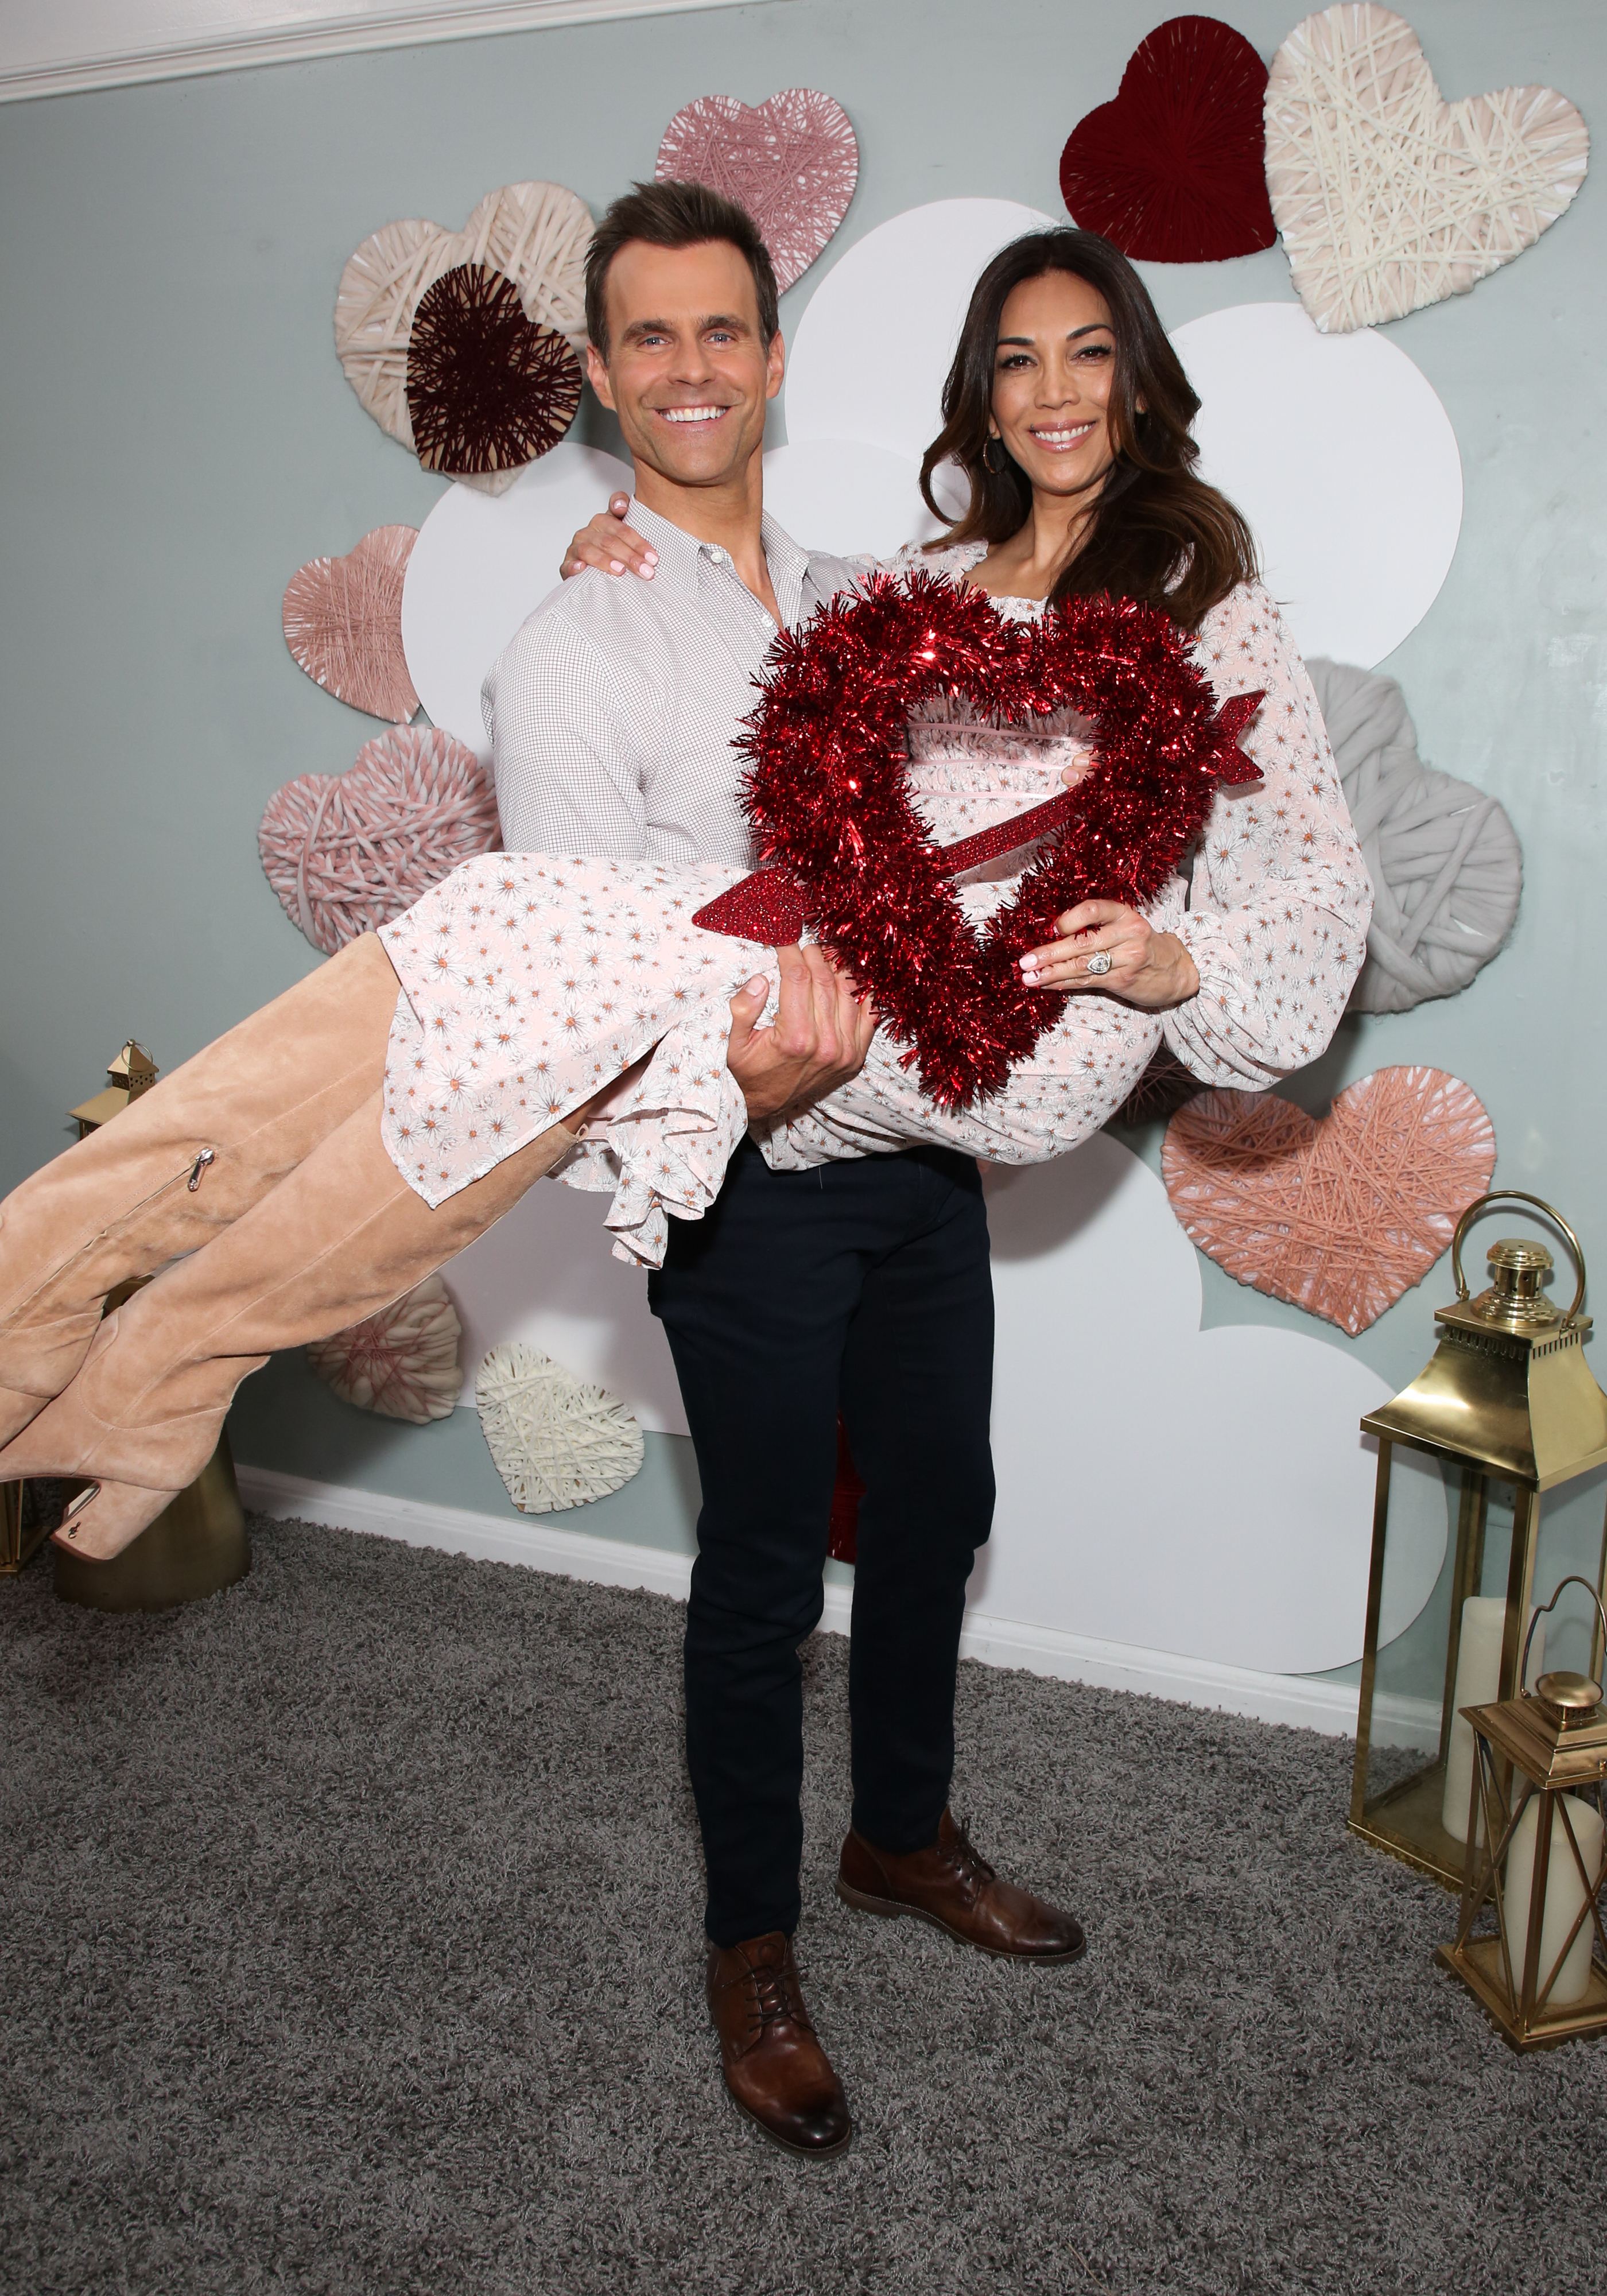 Home & Family Host Cameron Mathison and then-wife Vanessa Mathison on the set of the Hallmark Channel series on February 07, 2020